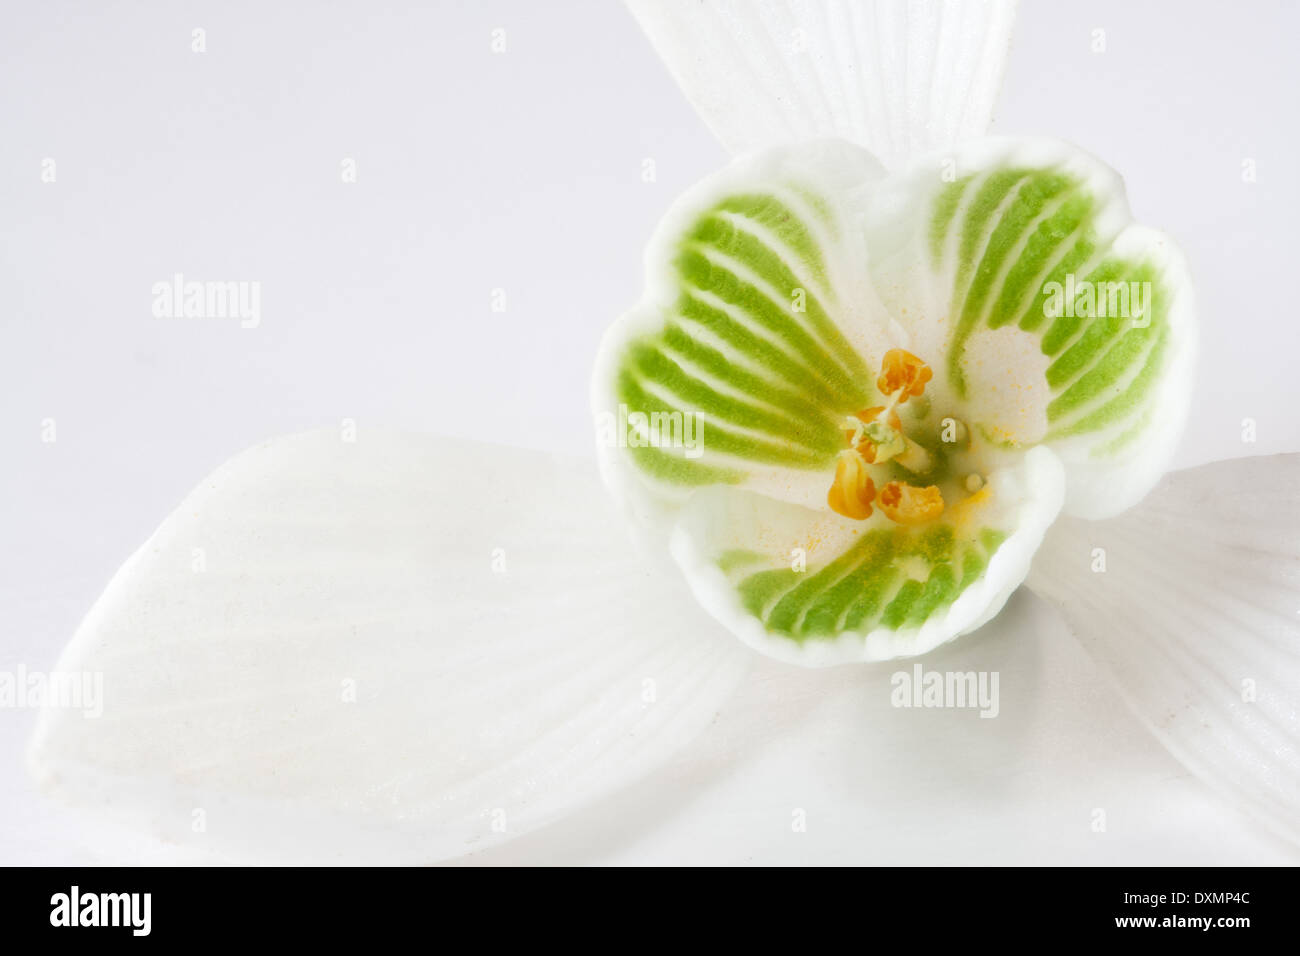 A close up picture of a snowdrop Stock Photo